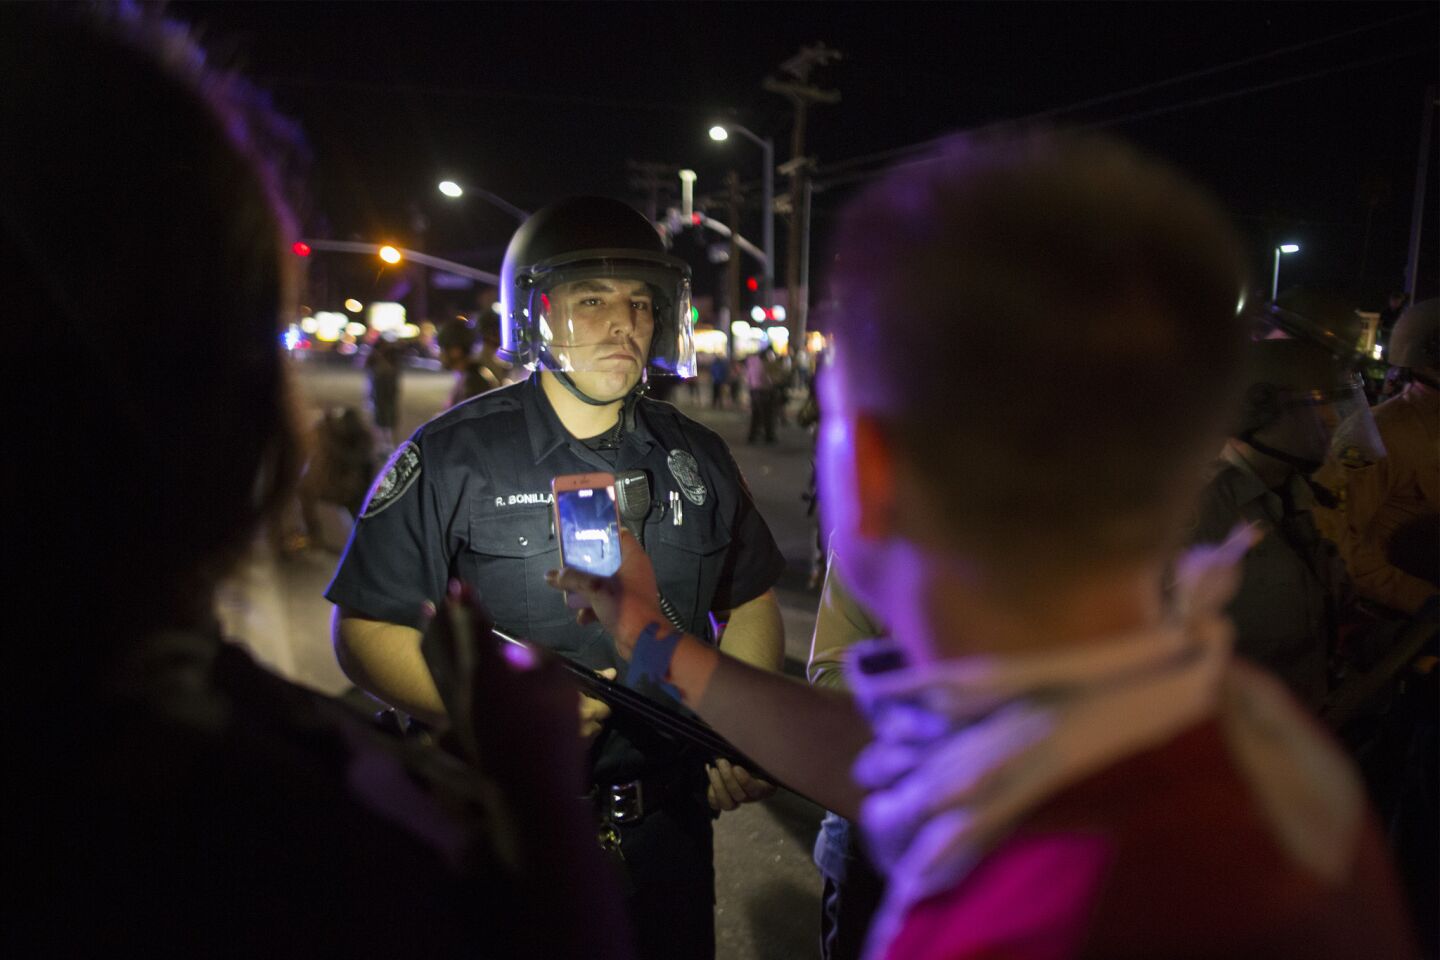 A protester points a cellphone at a police officer after an unlawful assembly is declared near the site where Alfred Olango had been shot by police earlier this week in El Cajon.